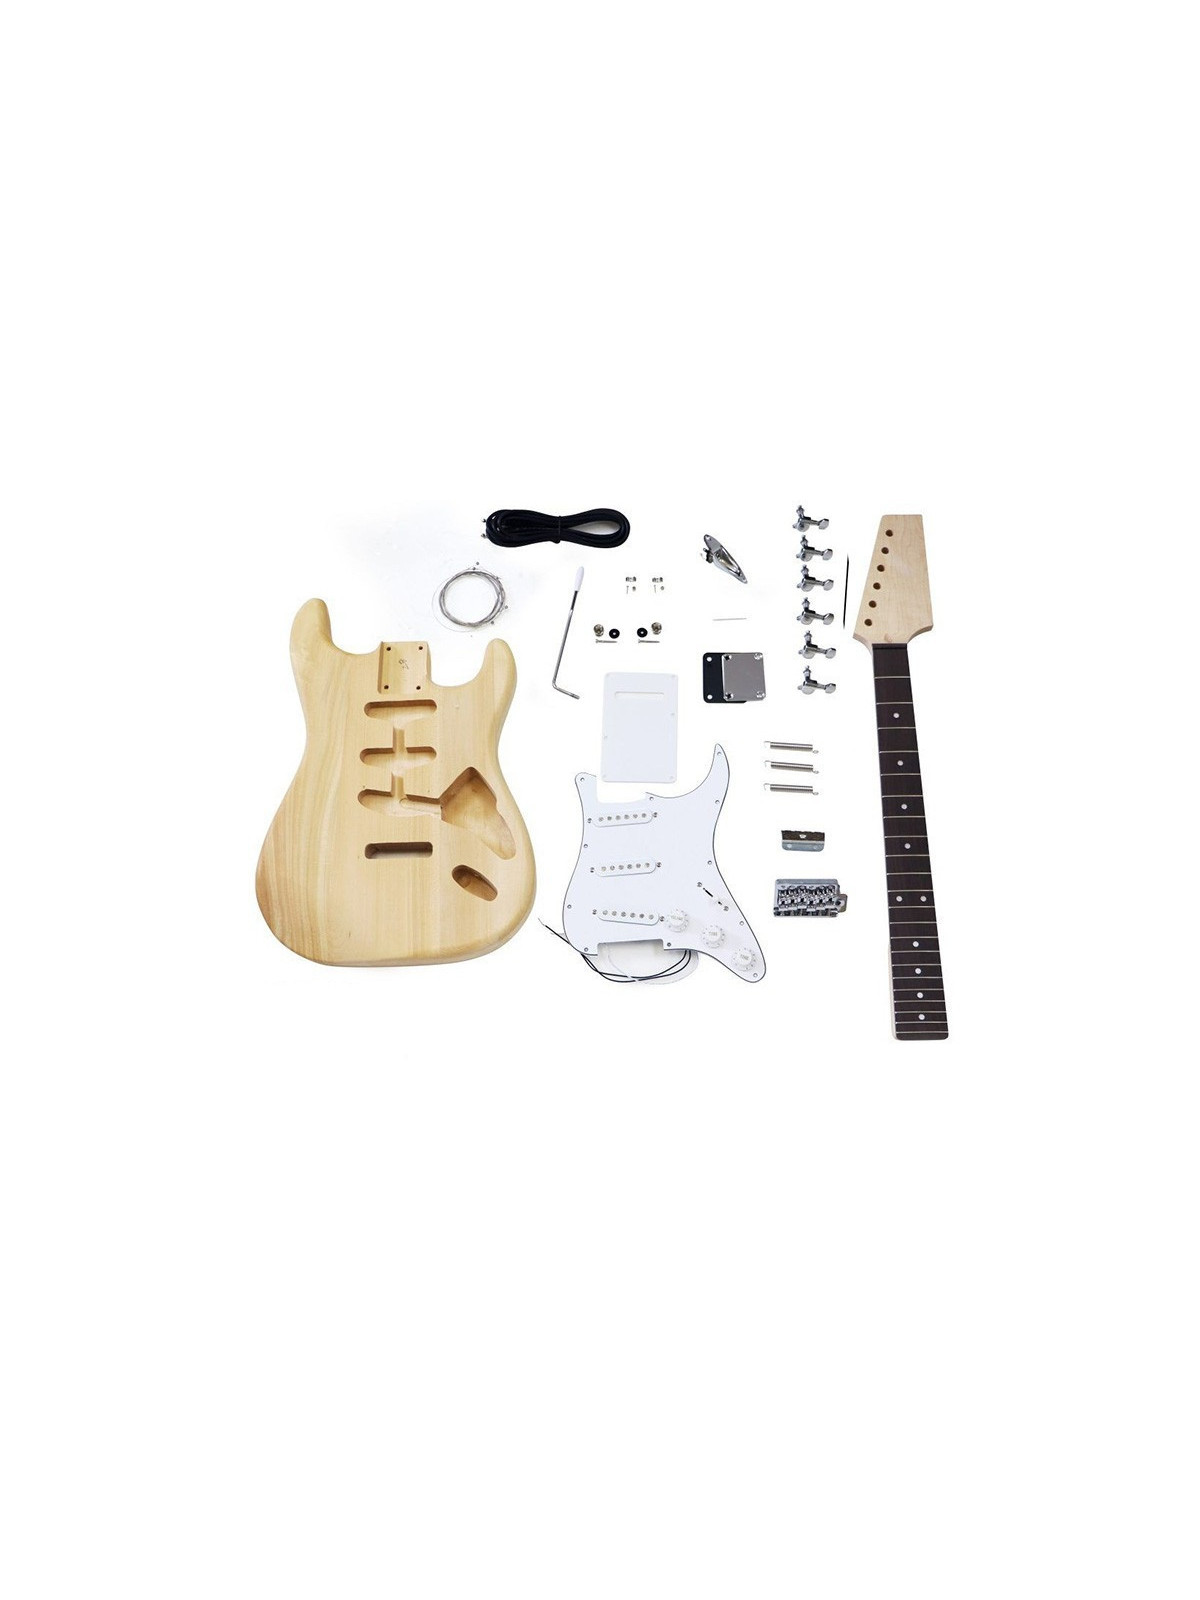 STRATOCASTER® STYLE ELECTRIC GUITAR KIT